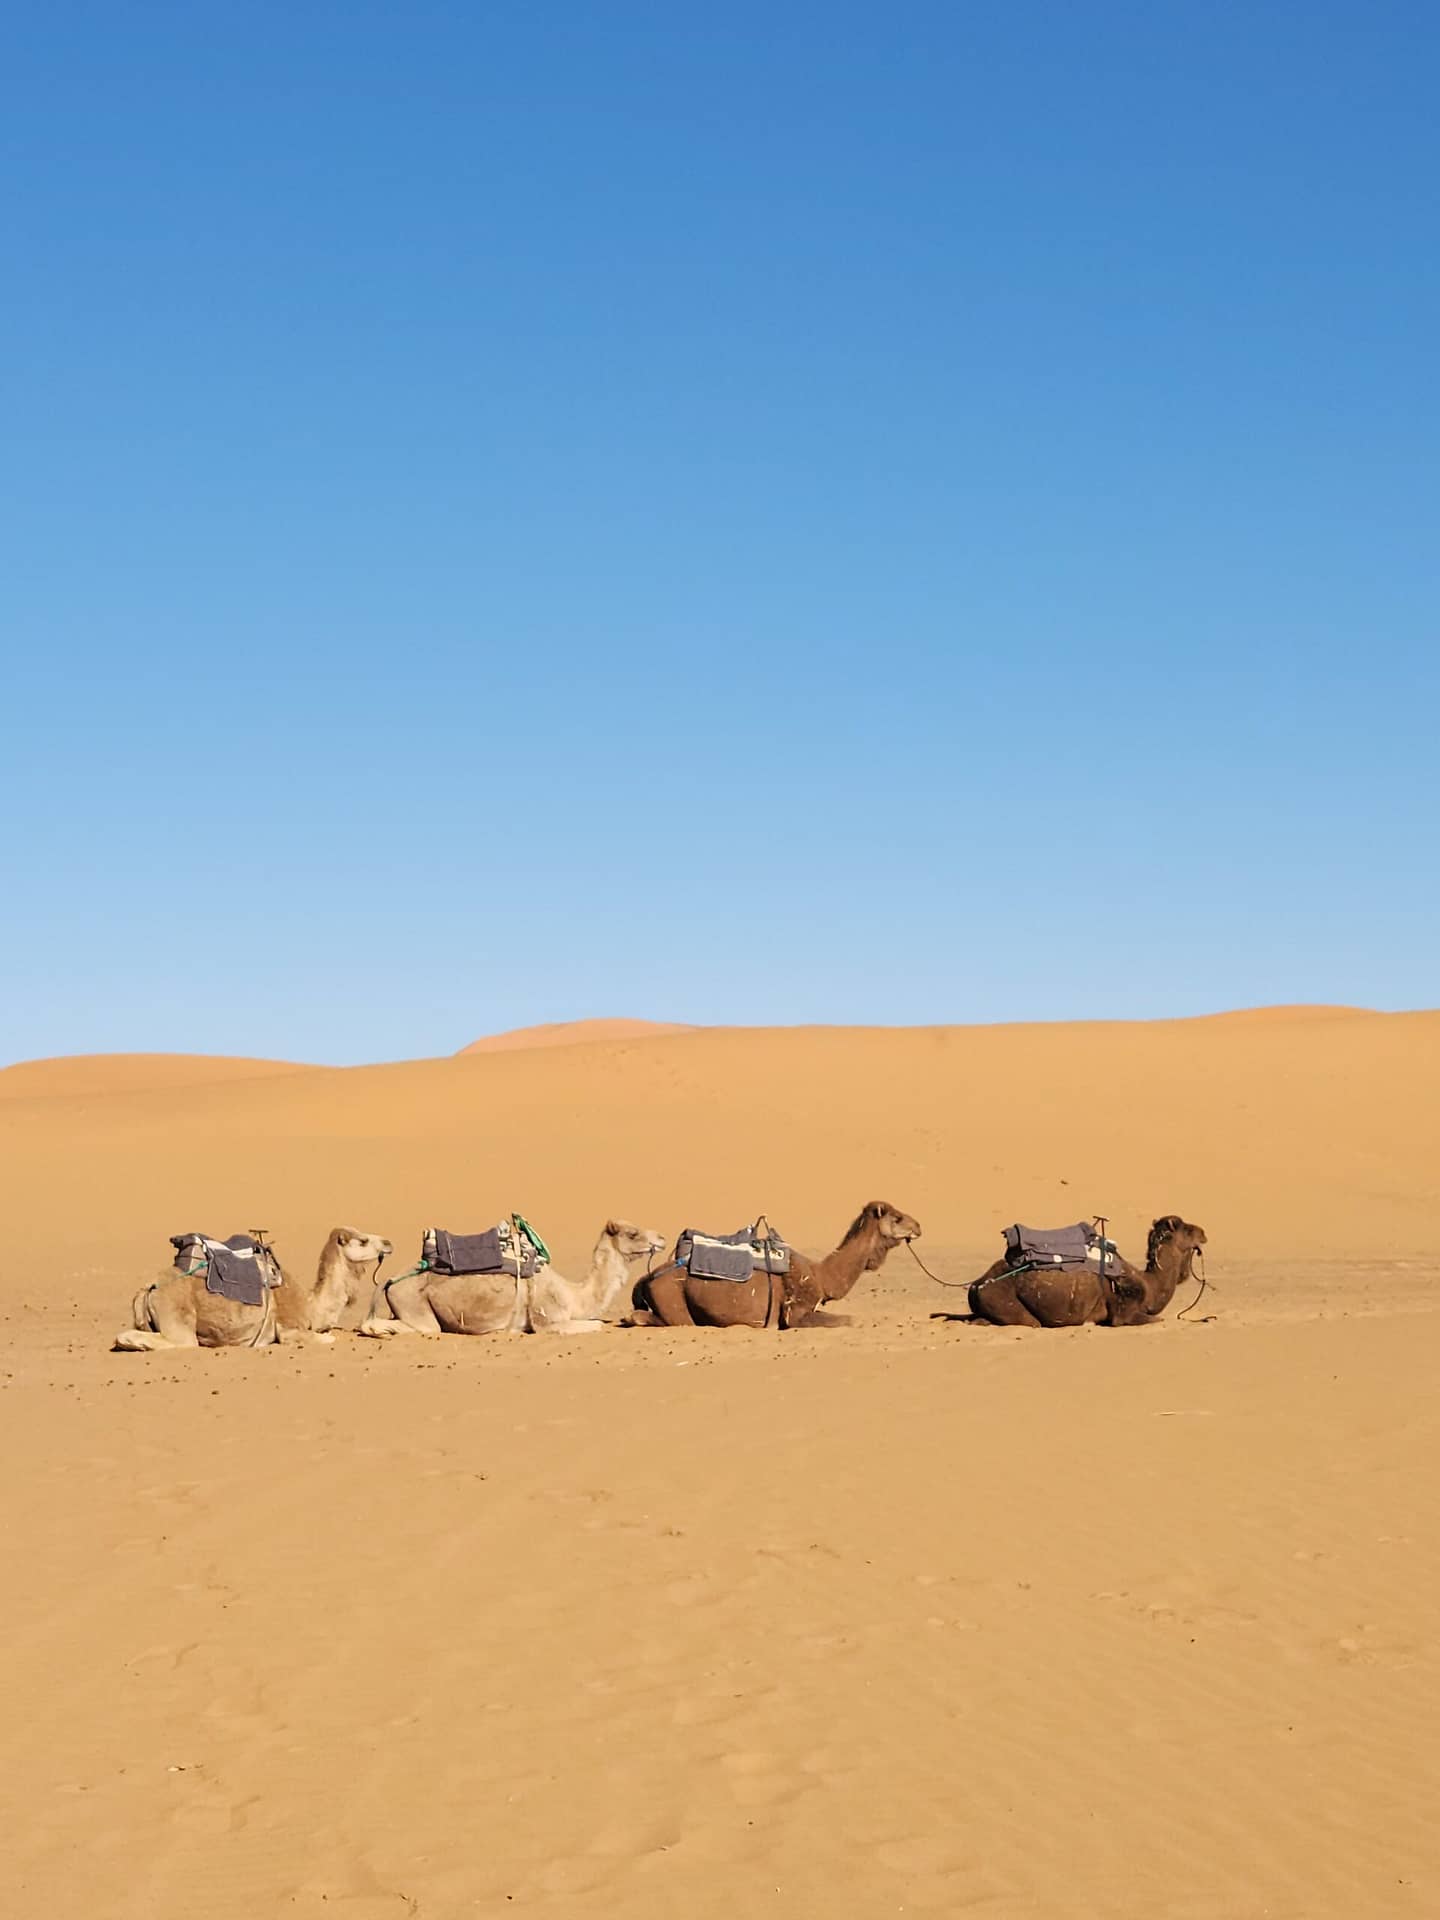 Camels sitting in the Sahara Desert with packs waiting patiently for their riders